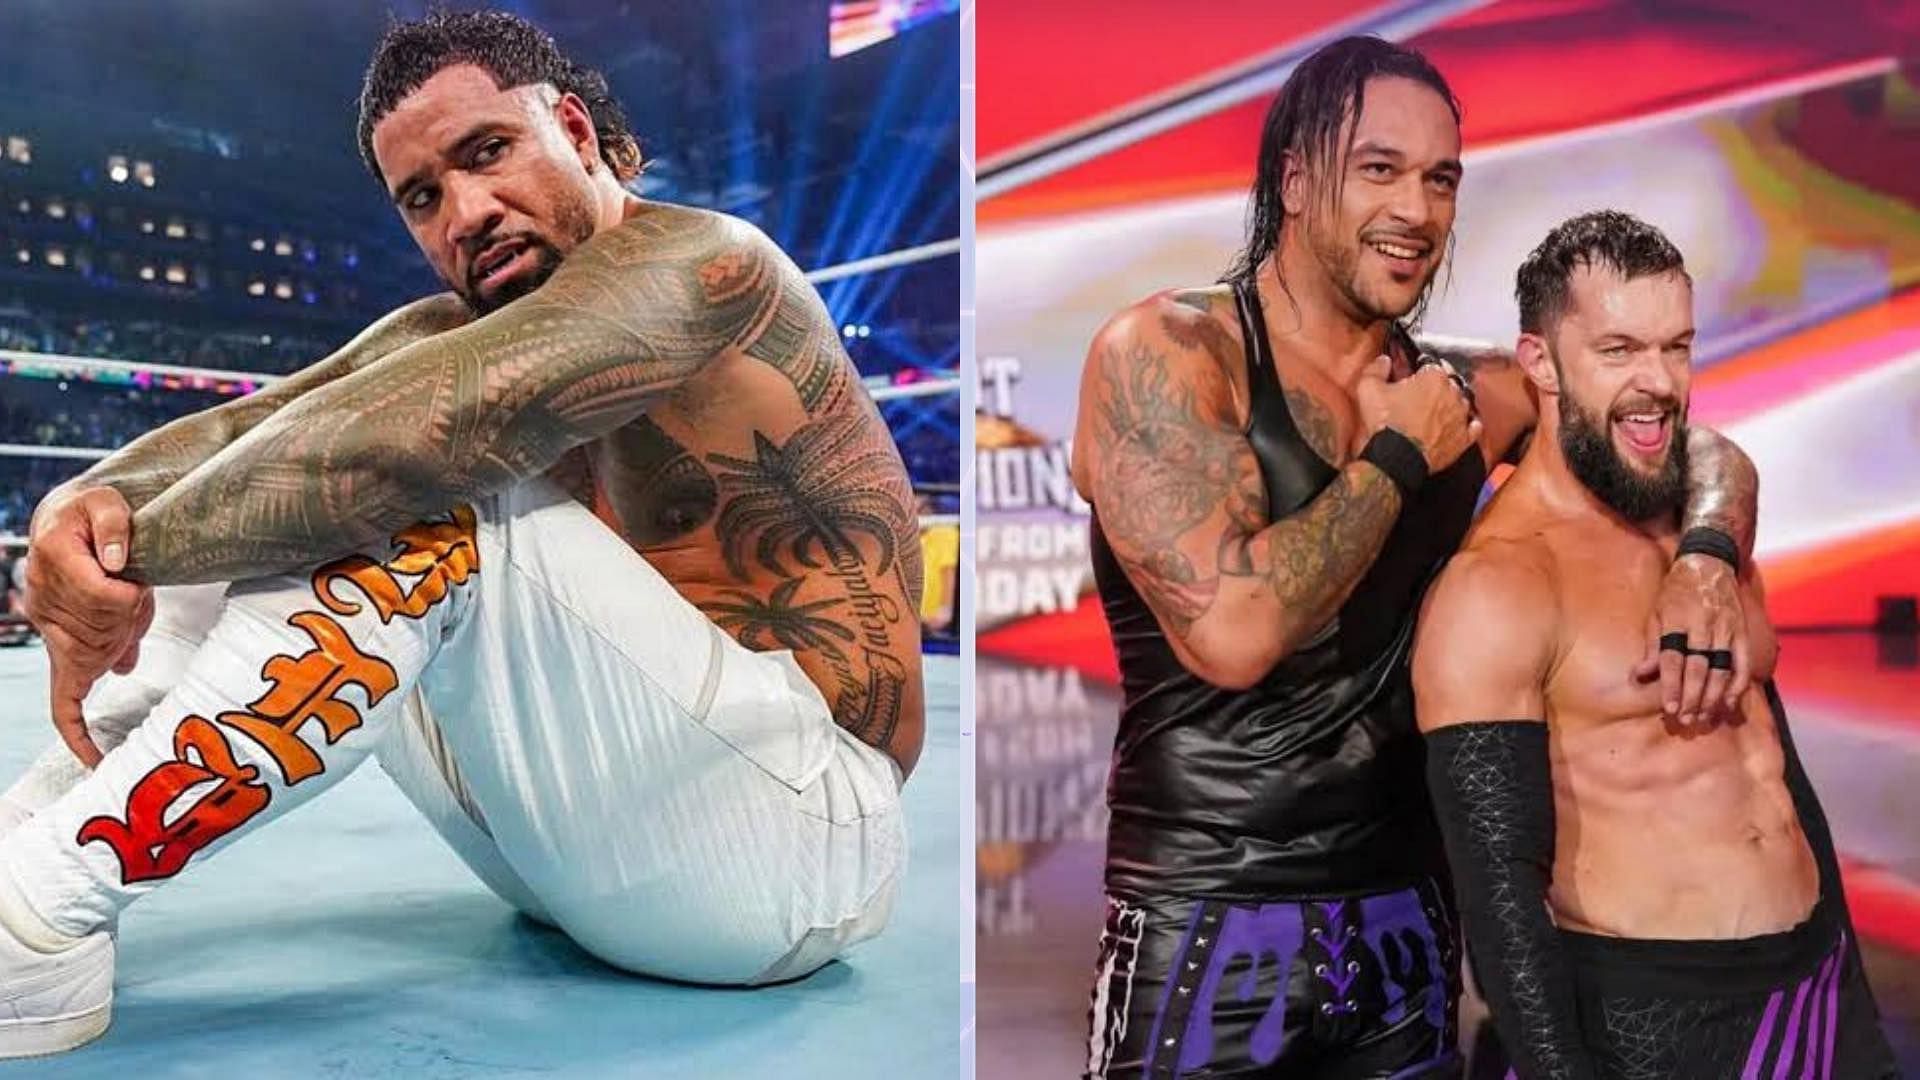 Jey Uso and The Judgment Day in picture